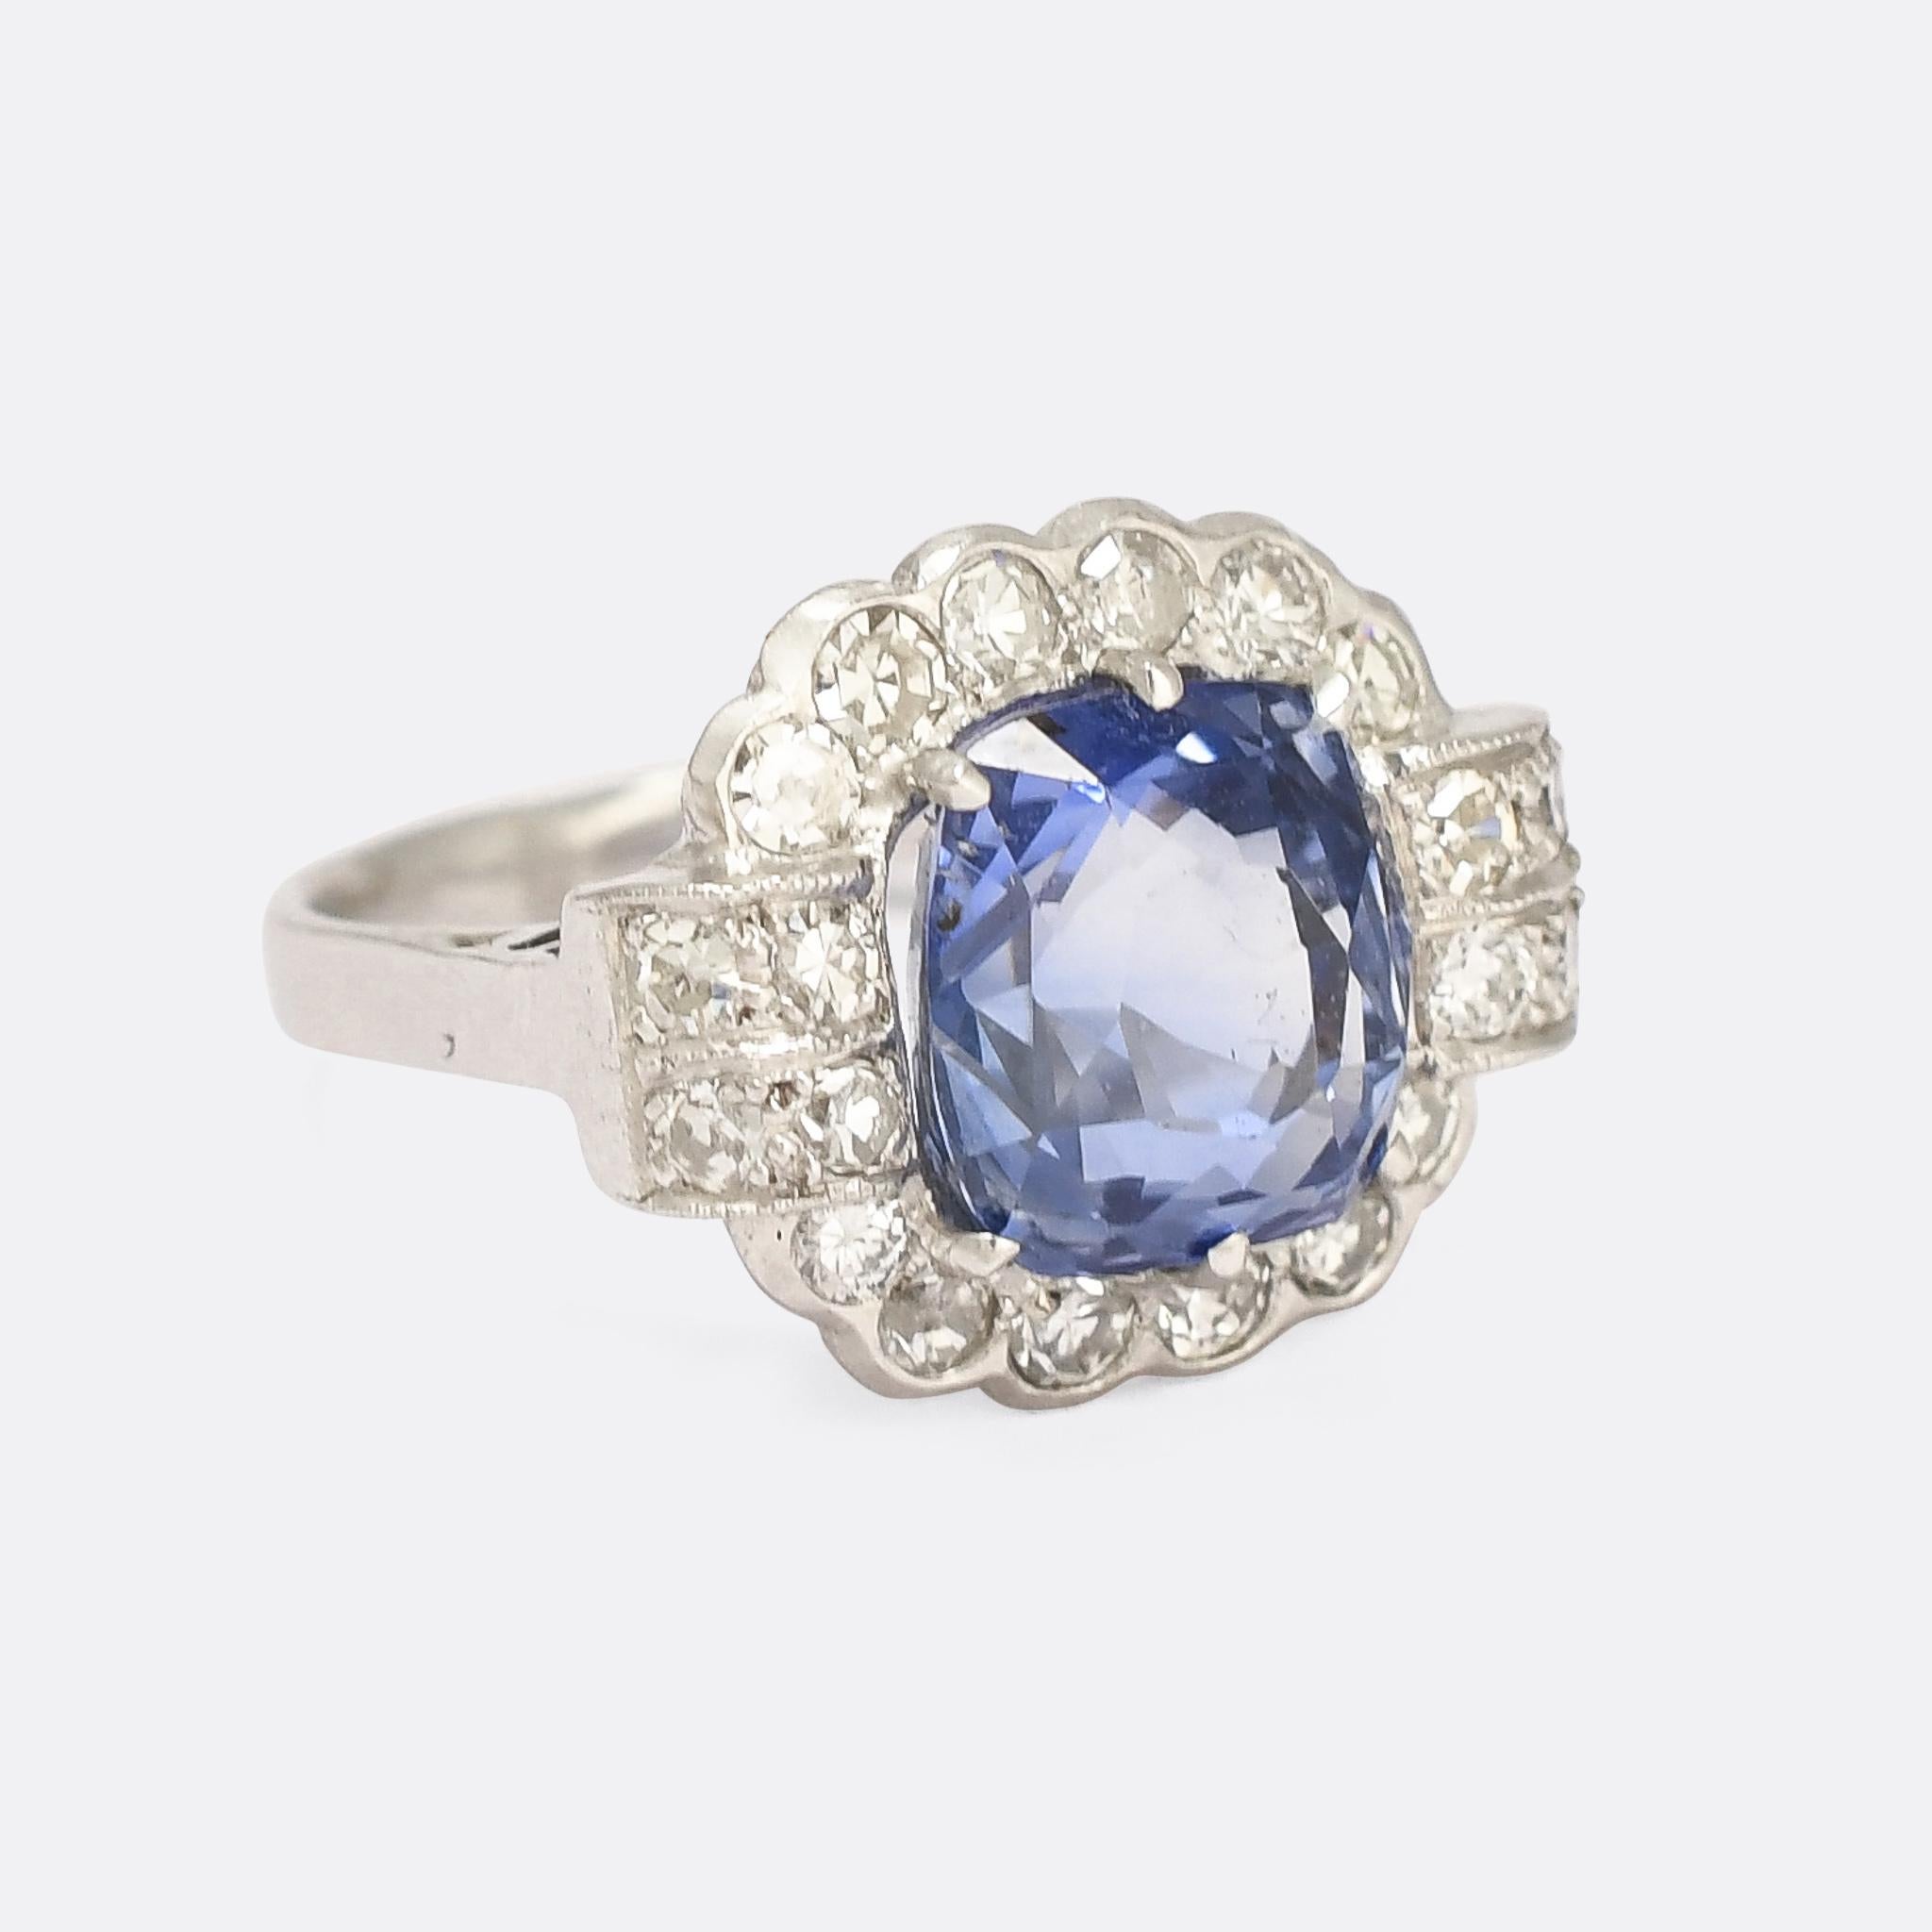 A stunning Art Deco period flower cluster ring crafted in France in the 1920s. The quality of the stone reflects the quality of the mount; a beautiful Ceylon sapphire displaying a vibrant blue at the paler end of cornflower. The cushion cut stone is